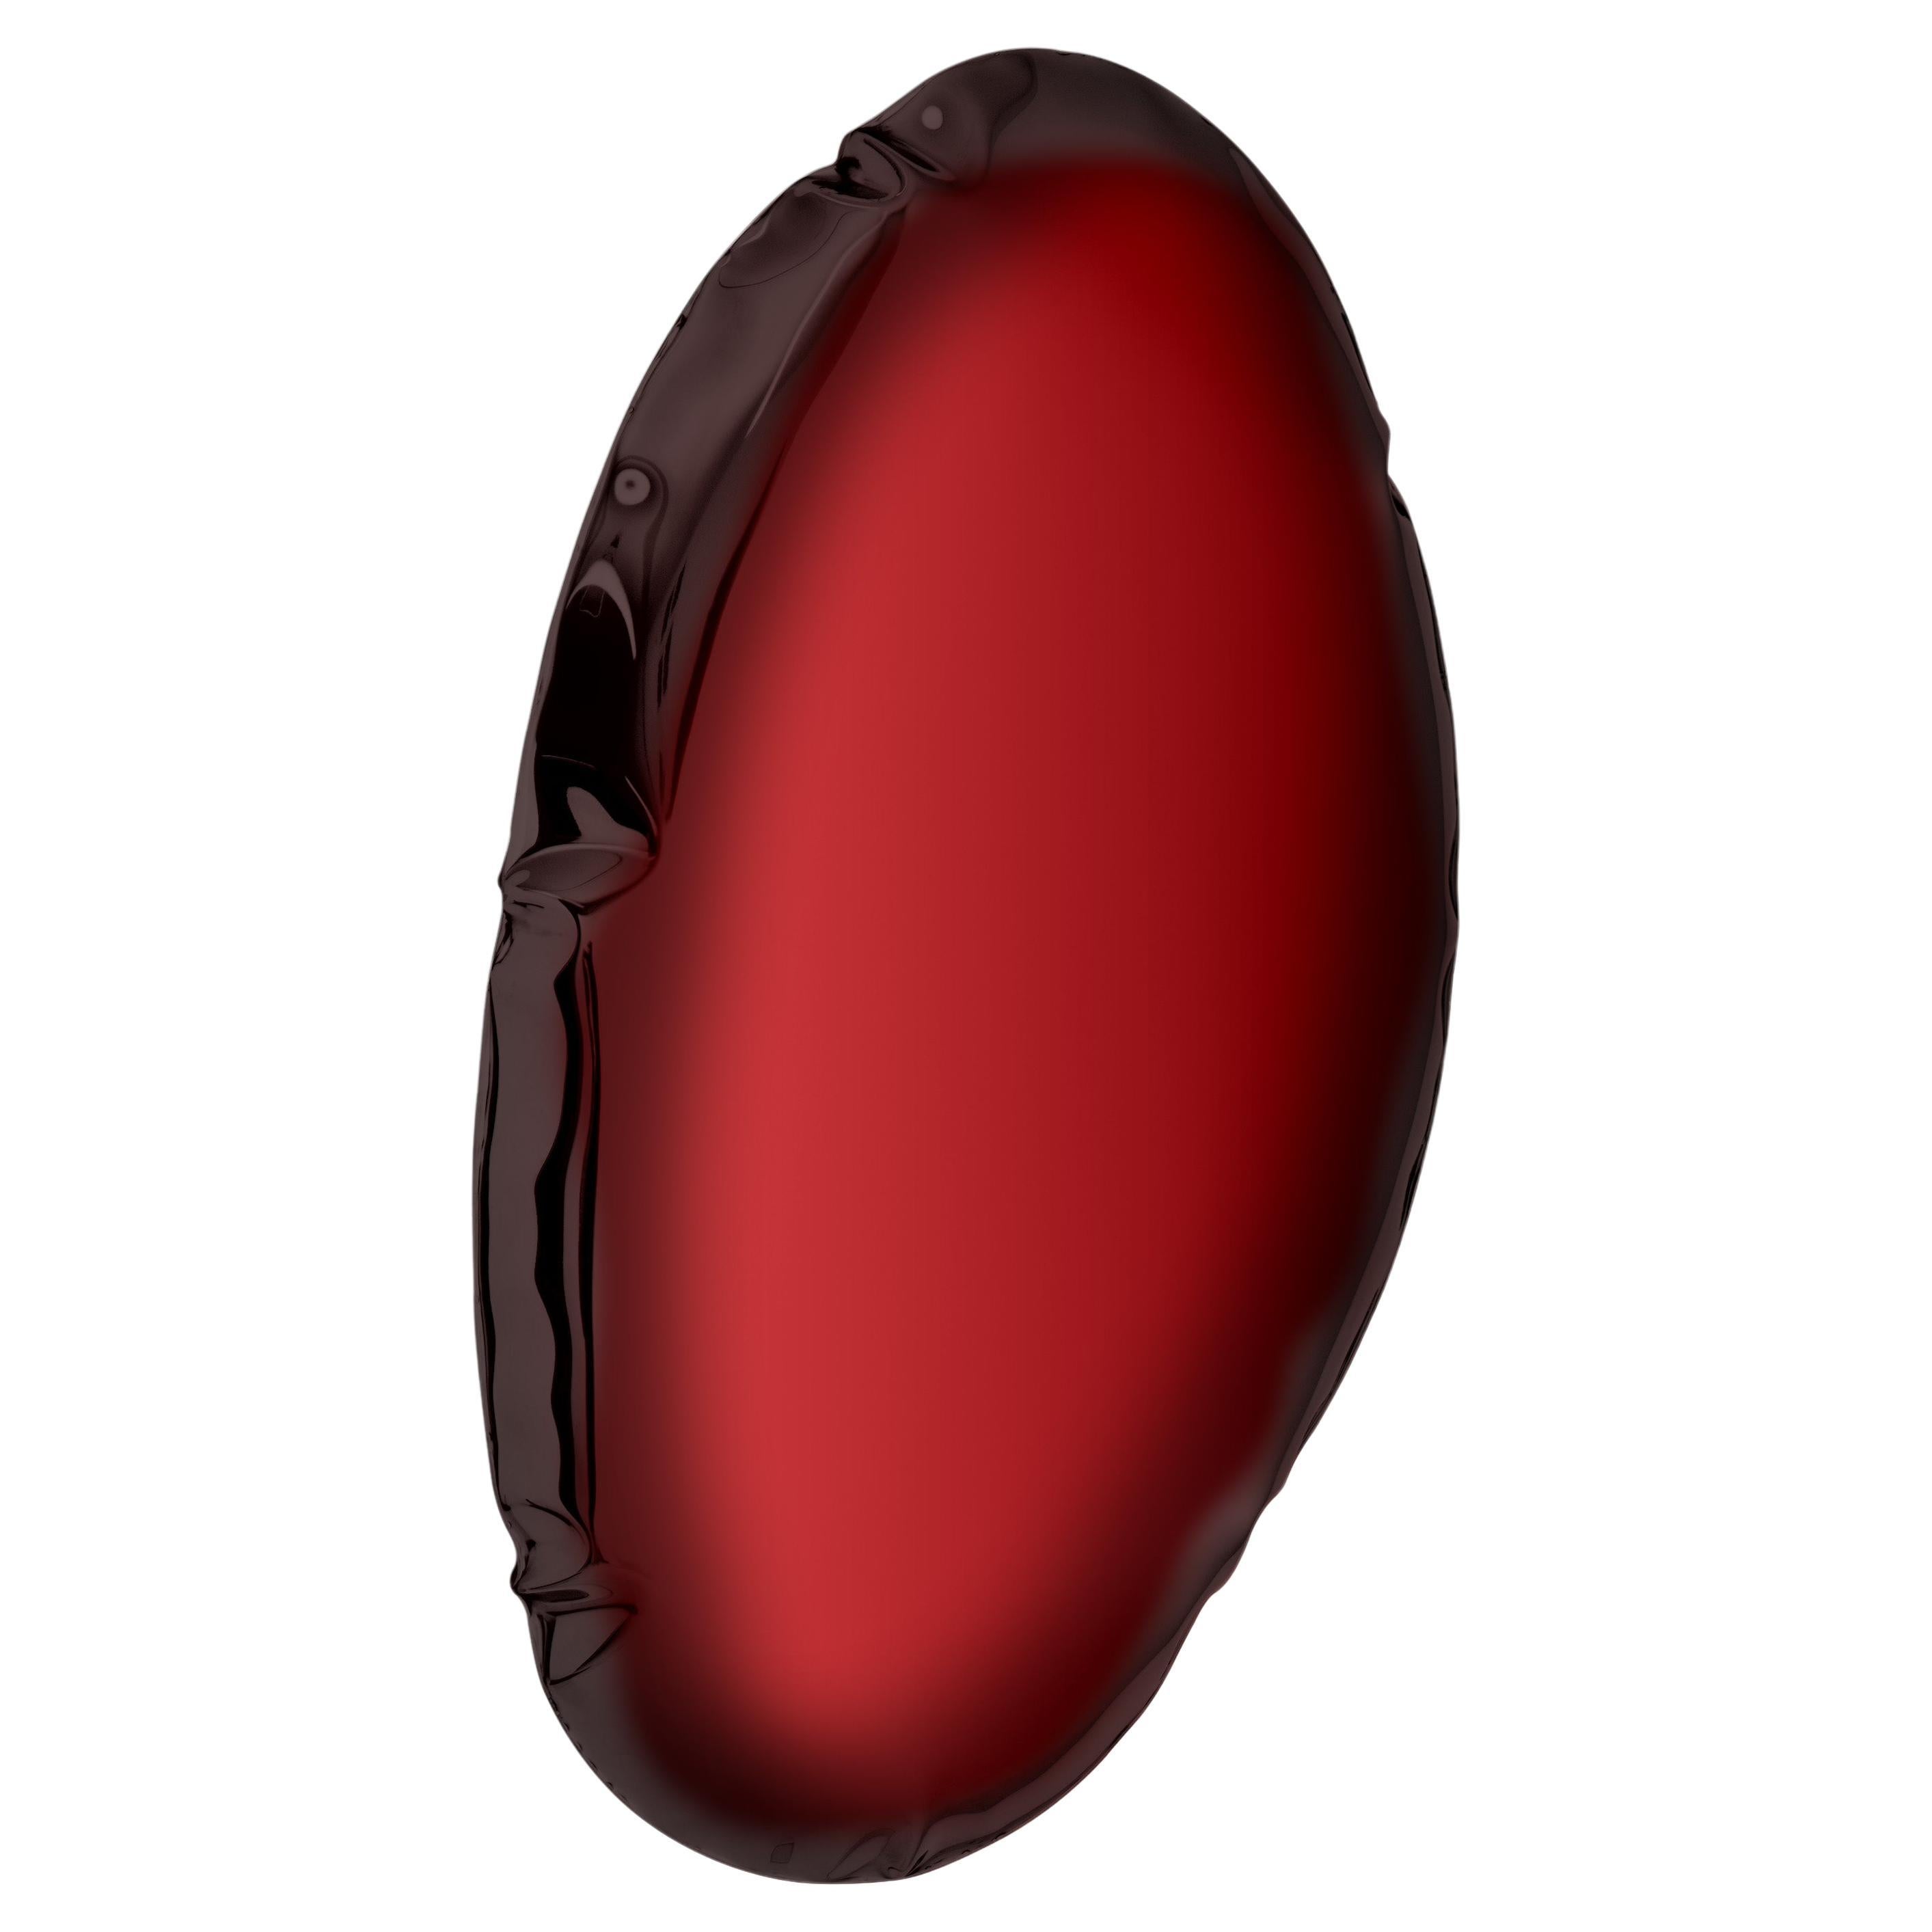 Tafla O5 Polished Rubin Red Color Stainless Steel Wall Mirror by Zieta